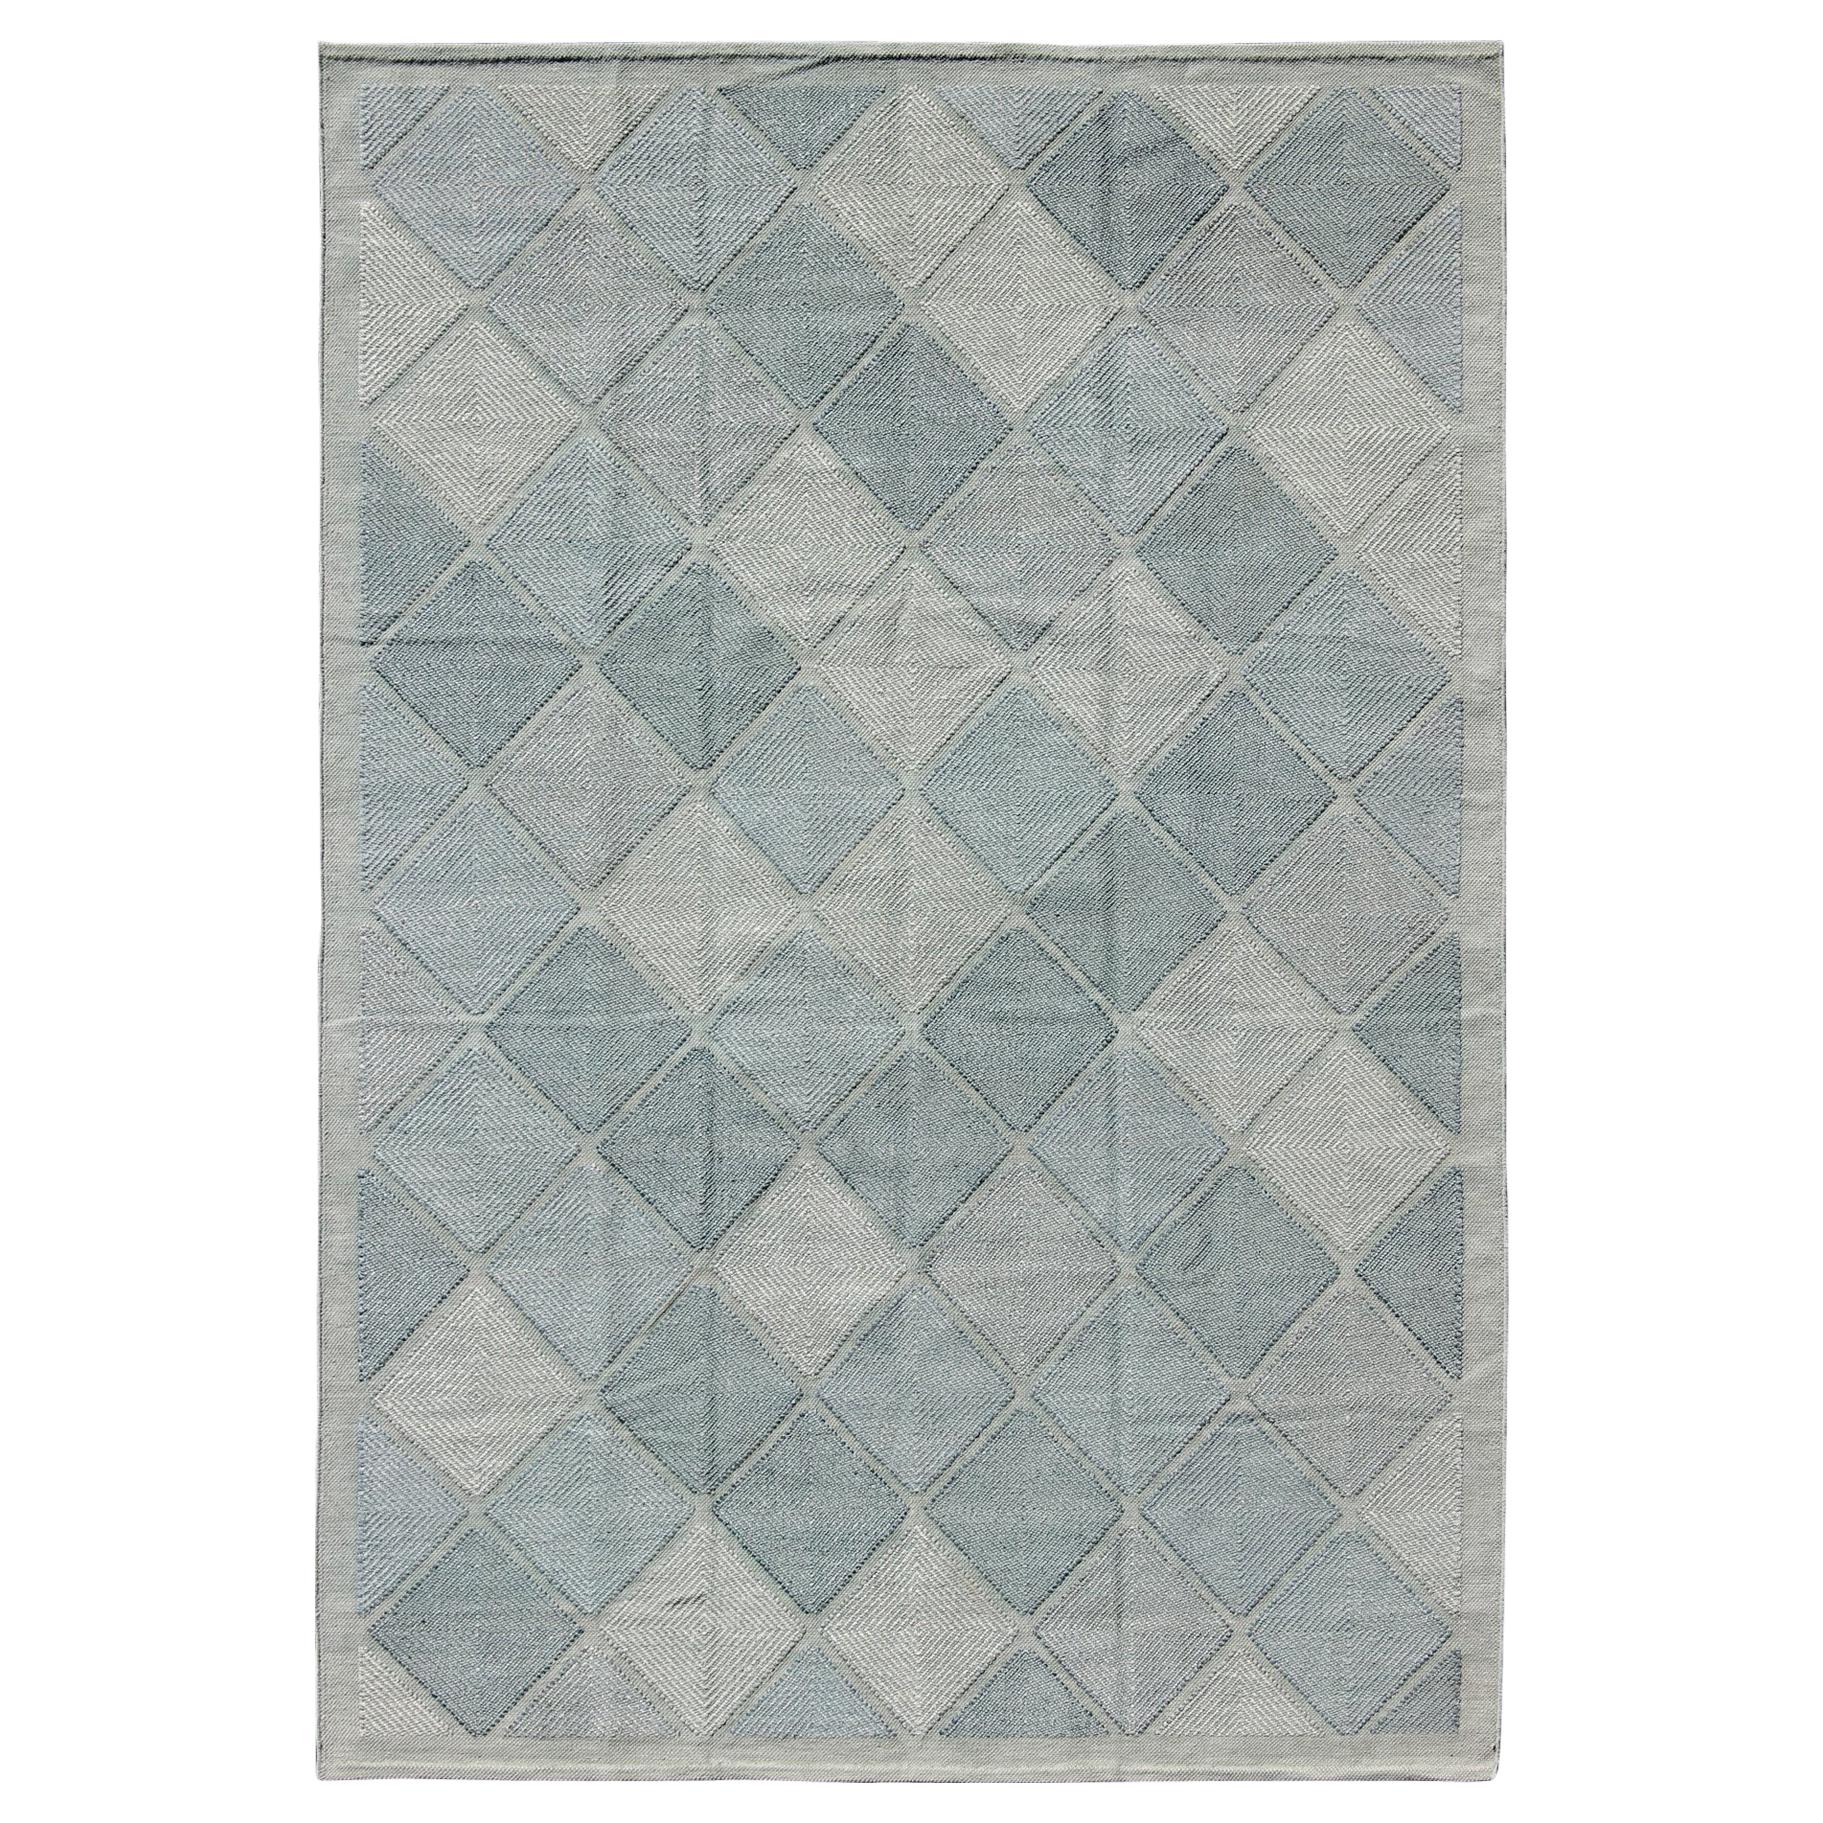 Large Scandinavian Inspired Design Rug in Blue, Tan and Gray Colors